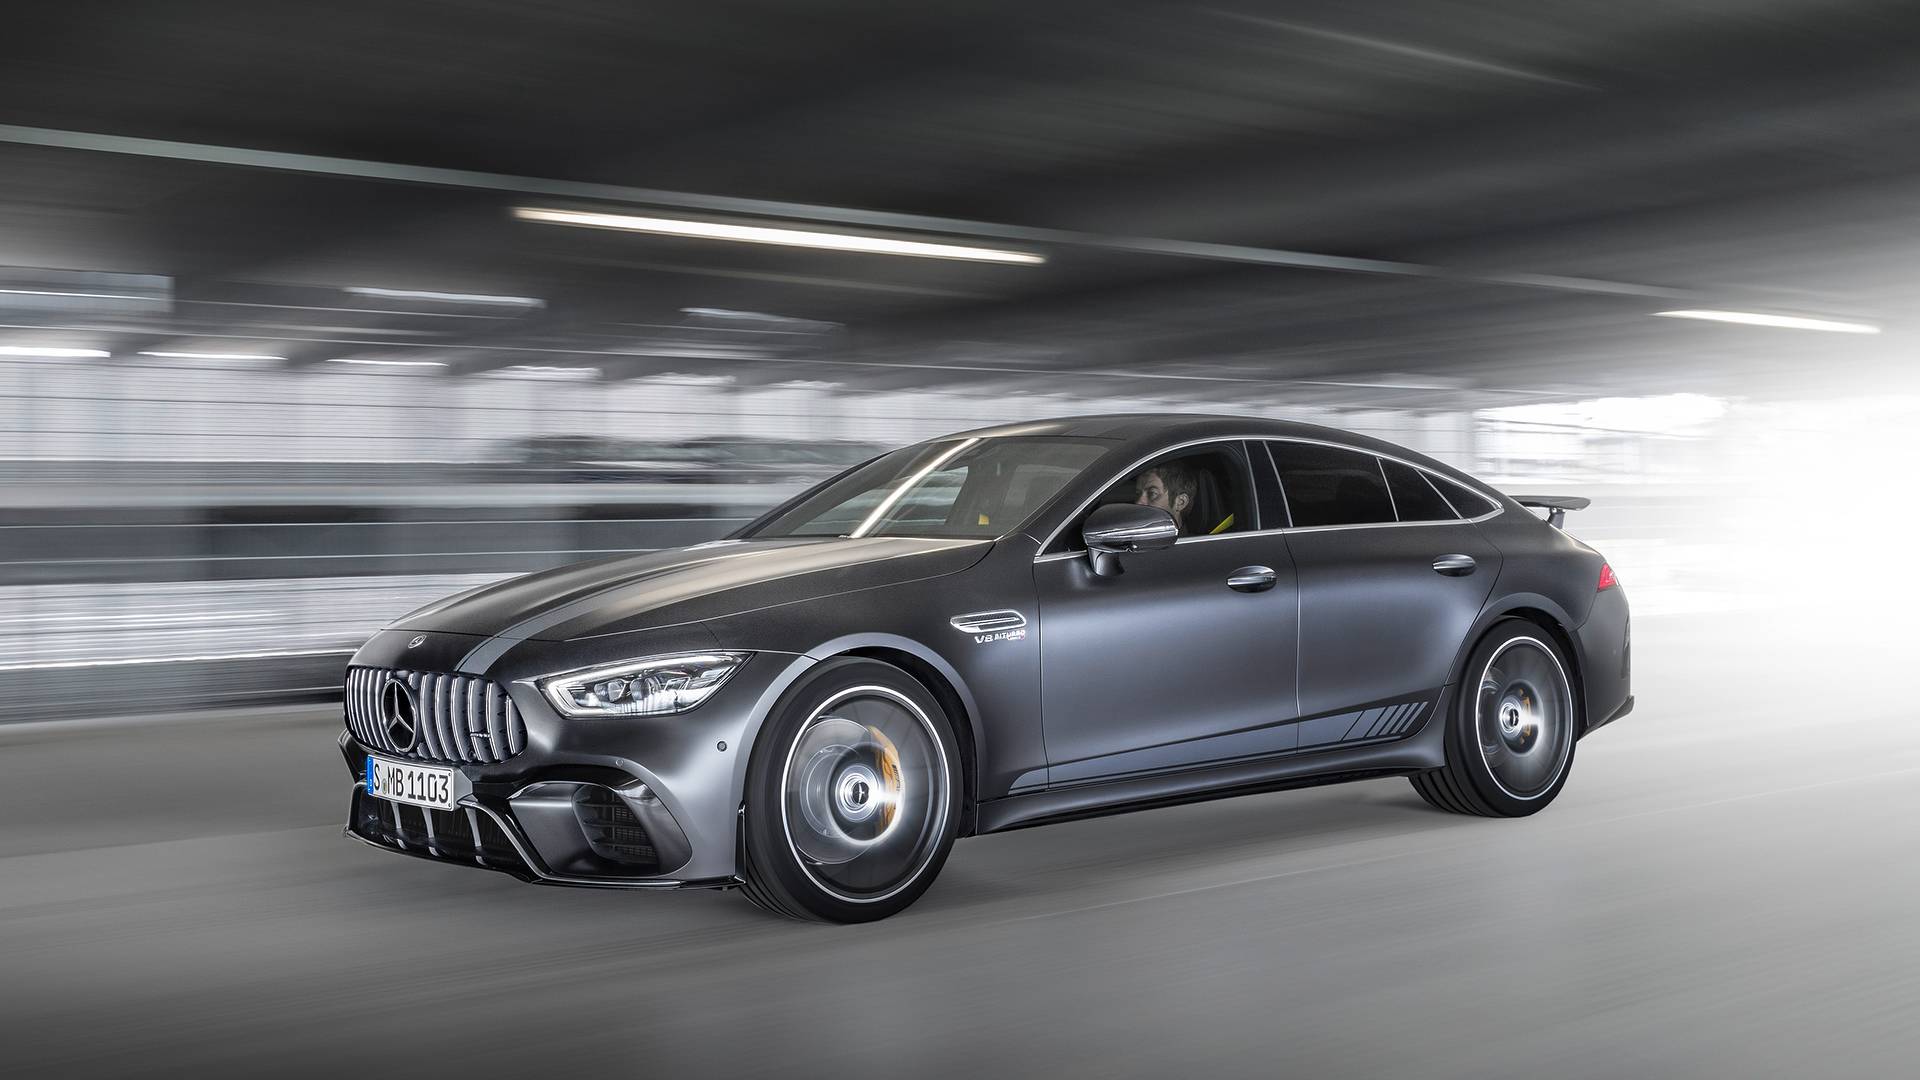 Mercedes Amg Gt 63 S 4matic Edition 1 Priced At Eur 185 342 In Germany Autoevolution